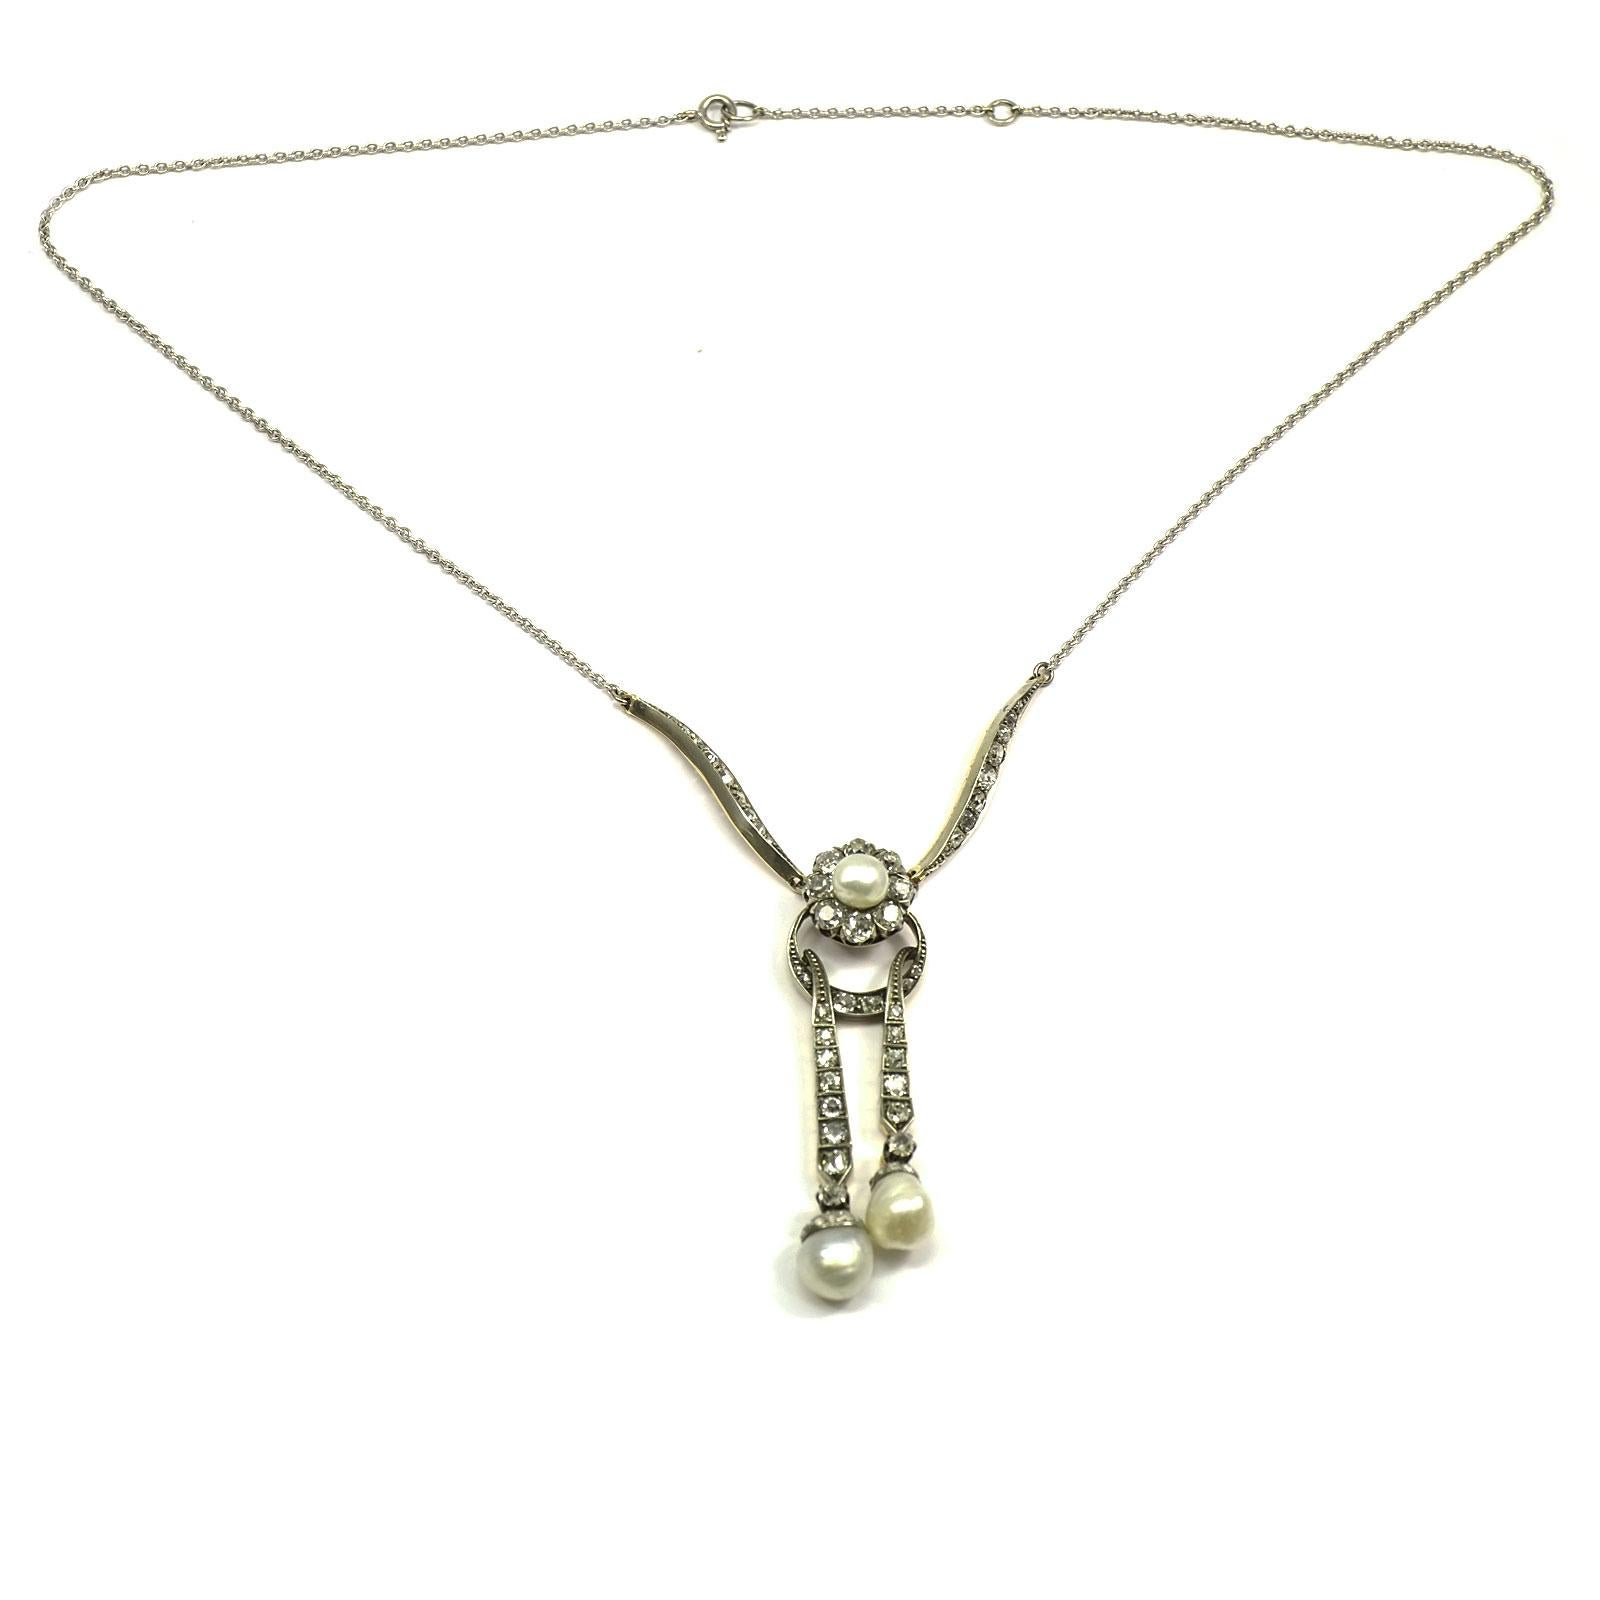 Edwardian 2.6 carat diamond and natural pearl Lavalier Necklace circa 1910

This decorative Lavalier necklace is designed as a pendant on diamond-set decorative motifs with a flower motif and two long movable pendants. Set with 69 diamonds with a